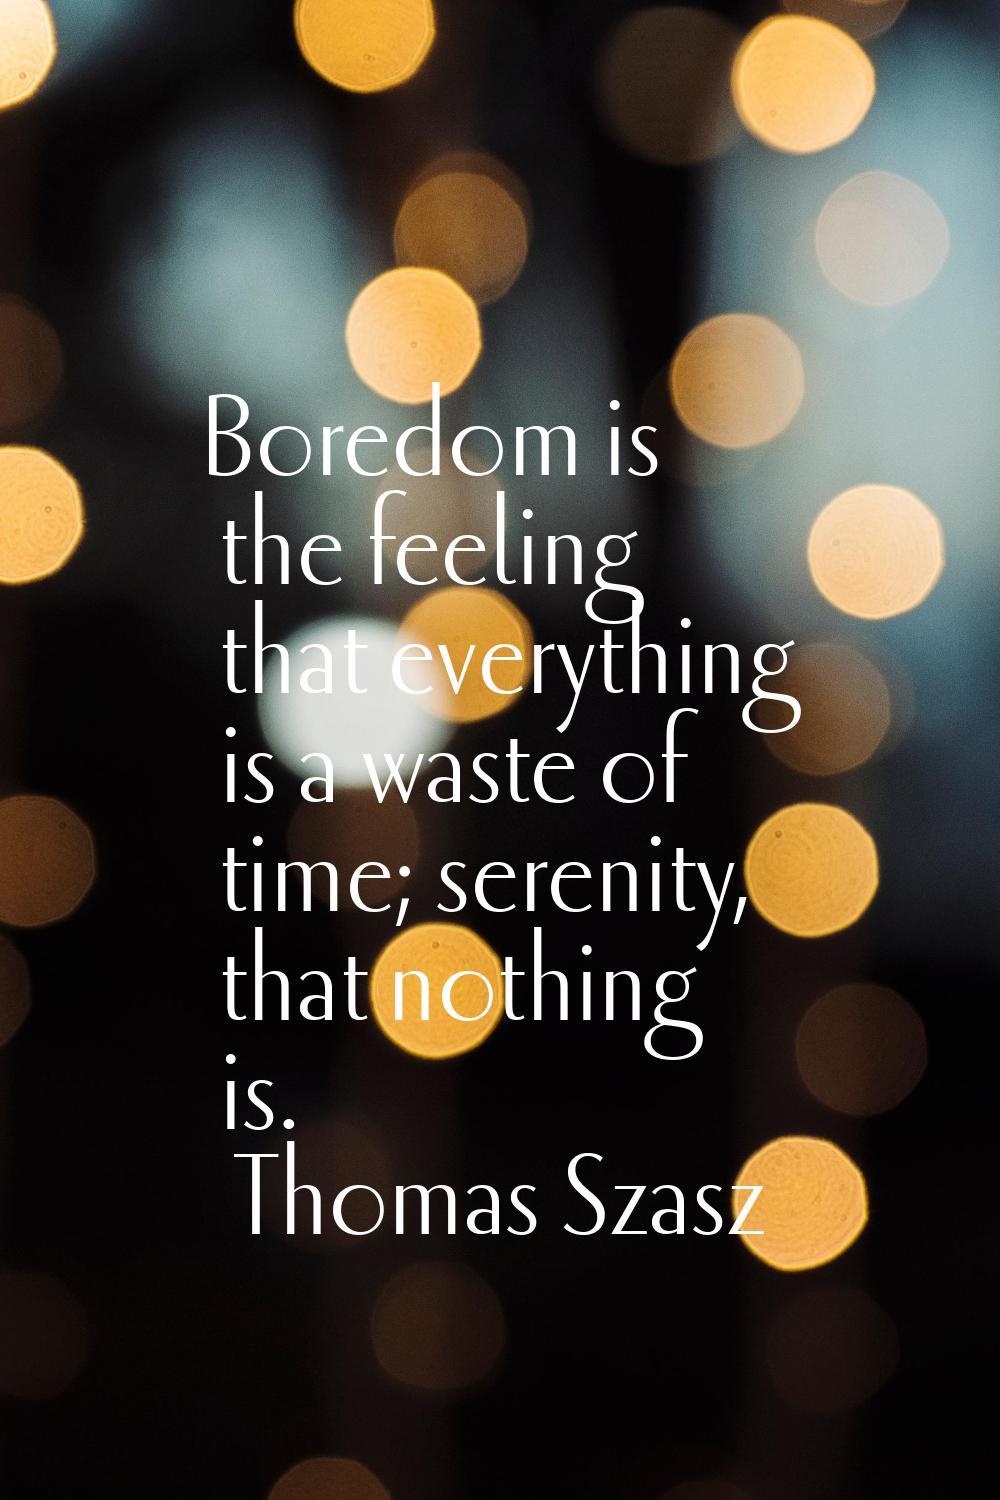 Boredom is the feeling that everything is a waste of time; serenity, that nothing is.